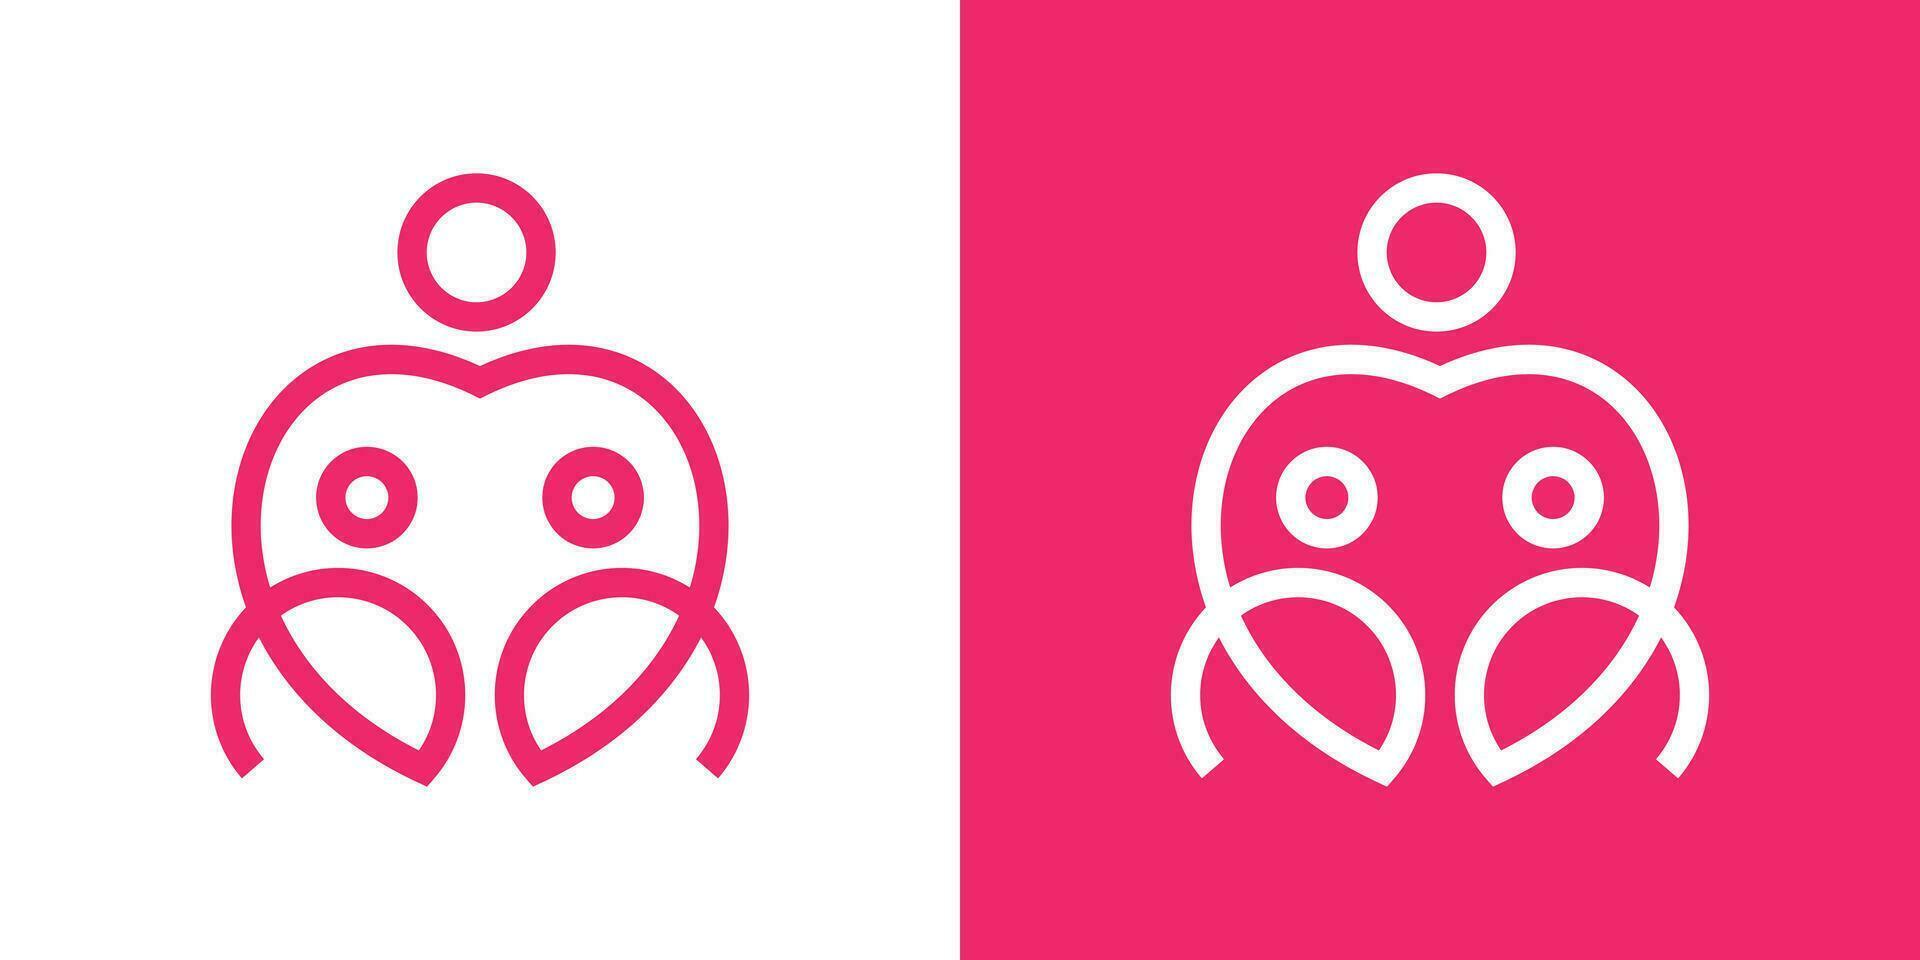 logo design of heart element combined with people and made in line style, this icon is suitable for family logo vector